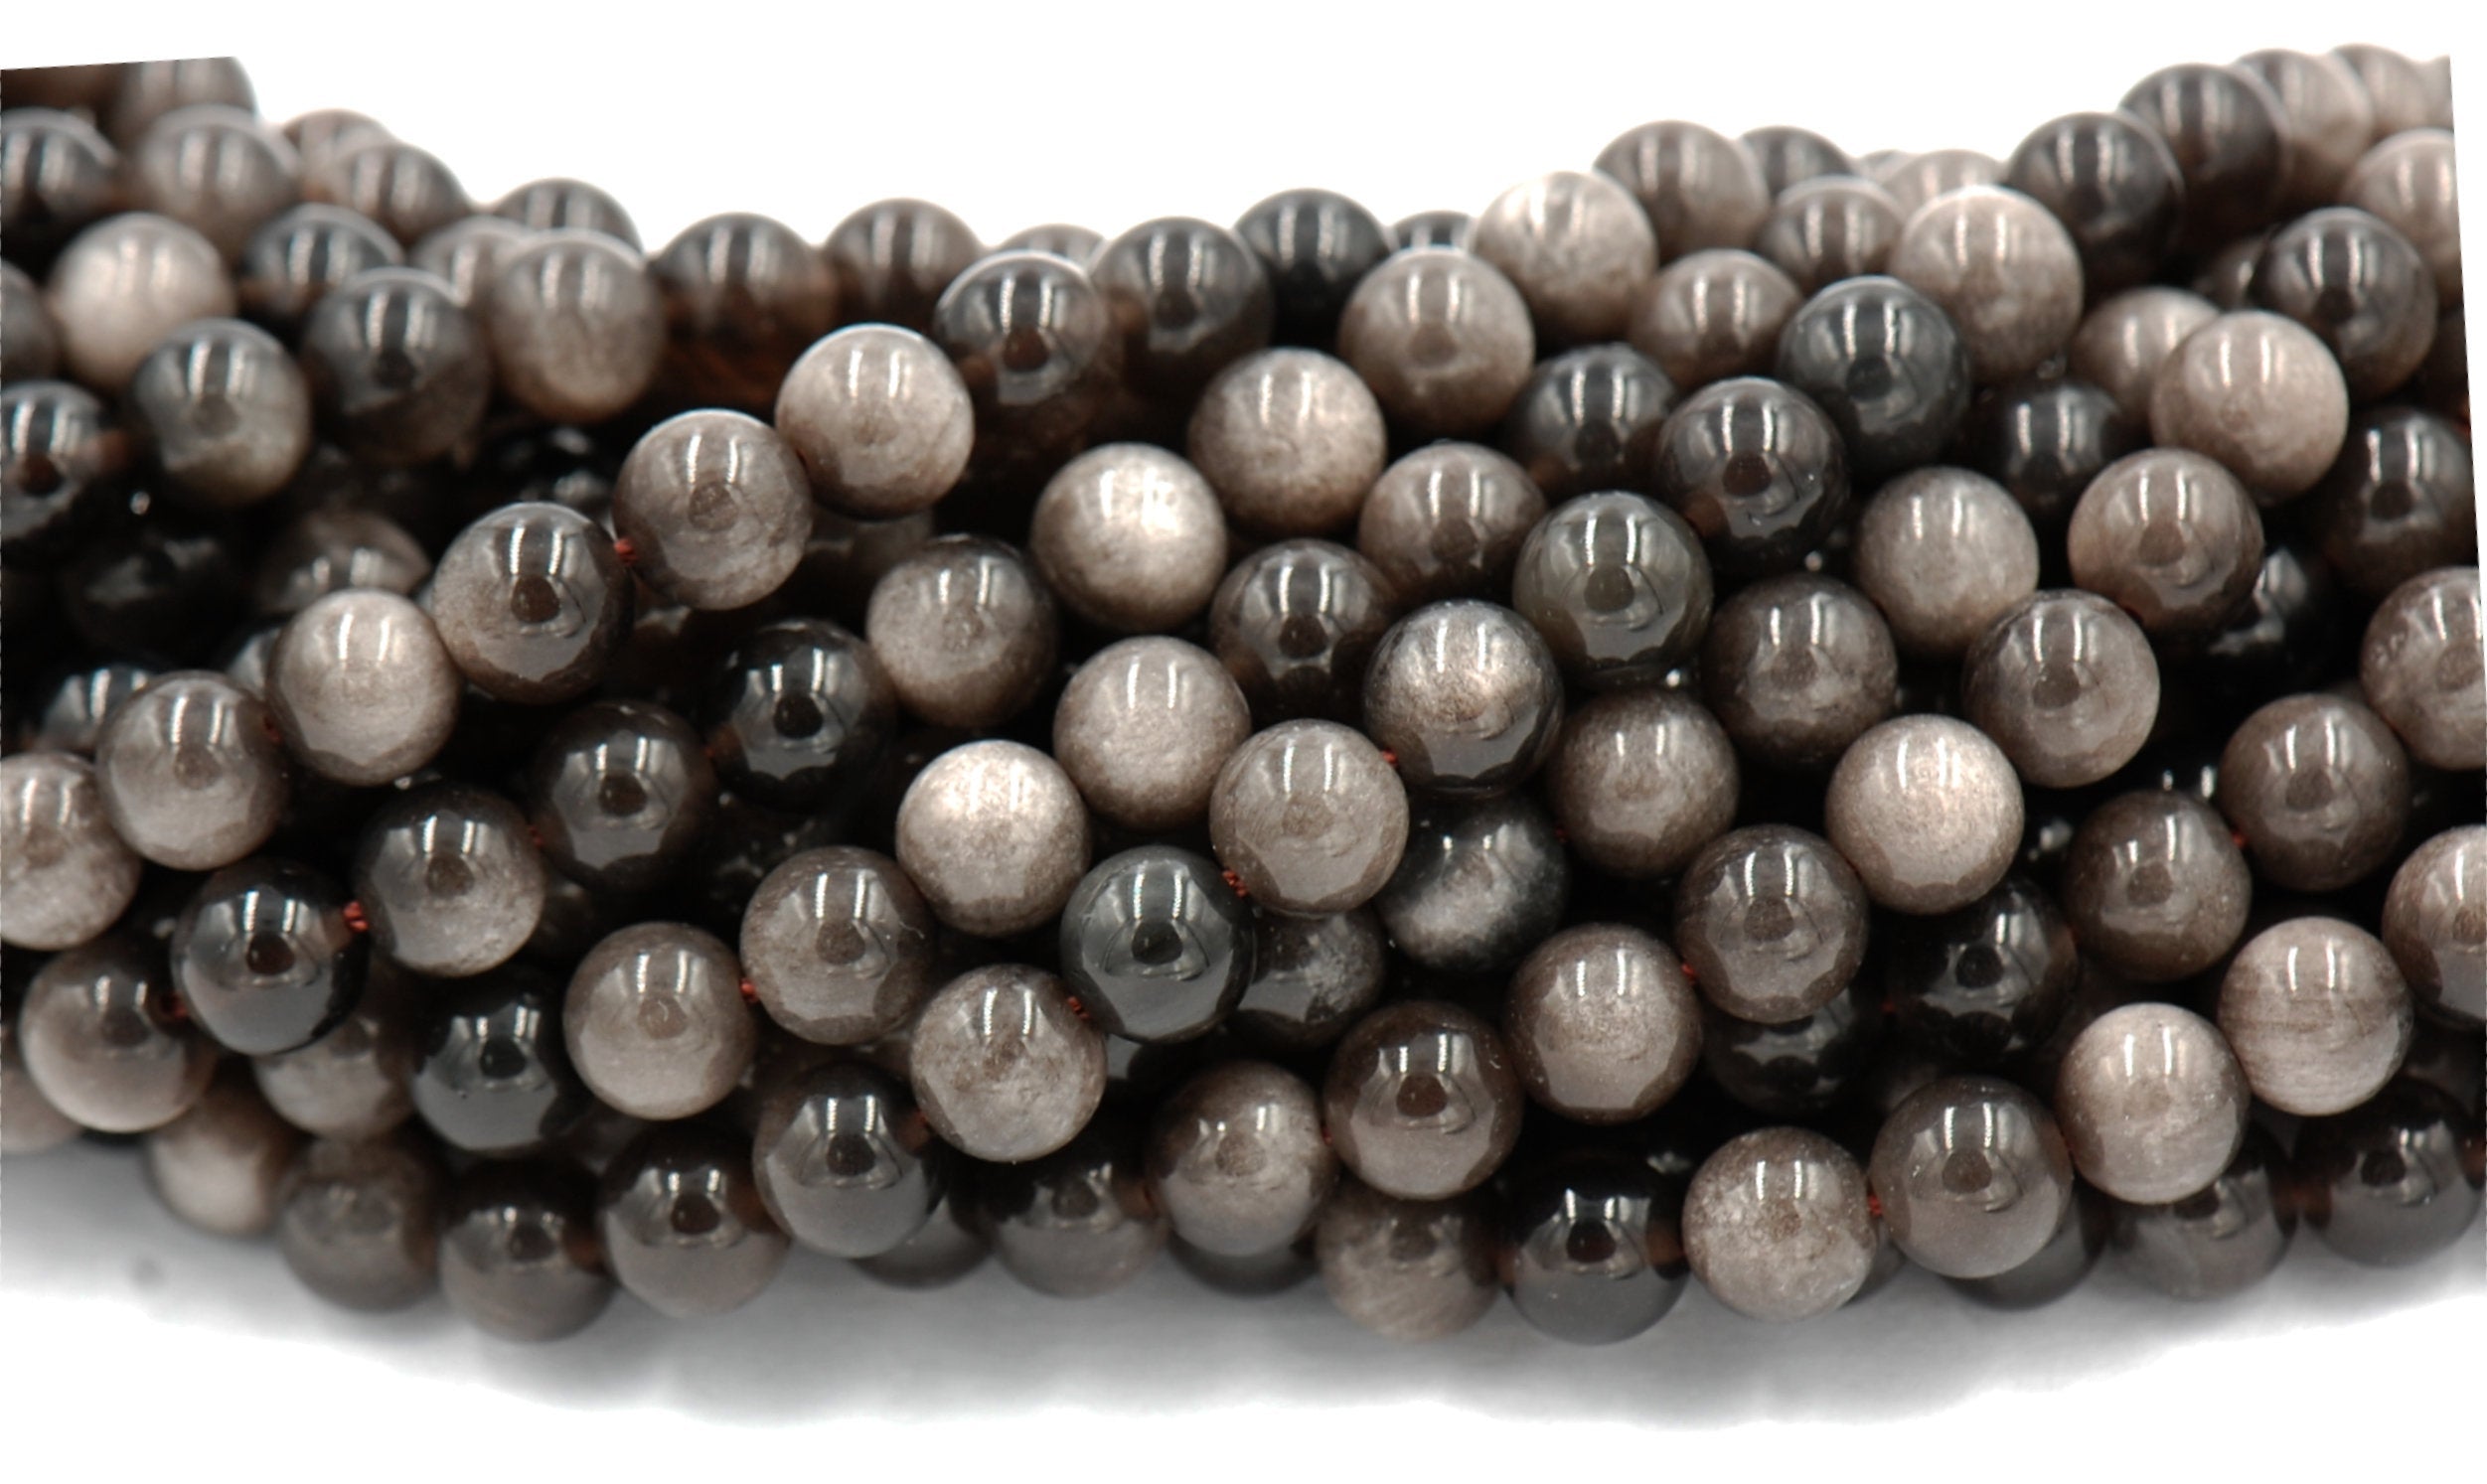 Silver Obsidian (natural) 6mm,8mm,10mm,12mm round-full strand